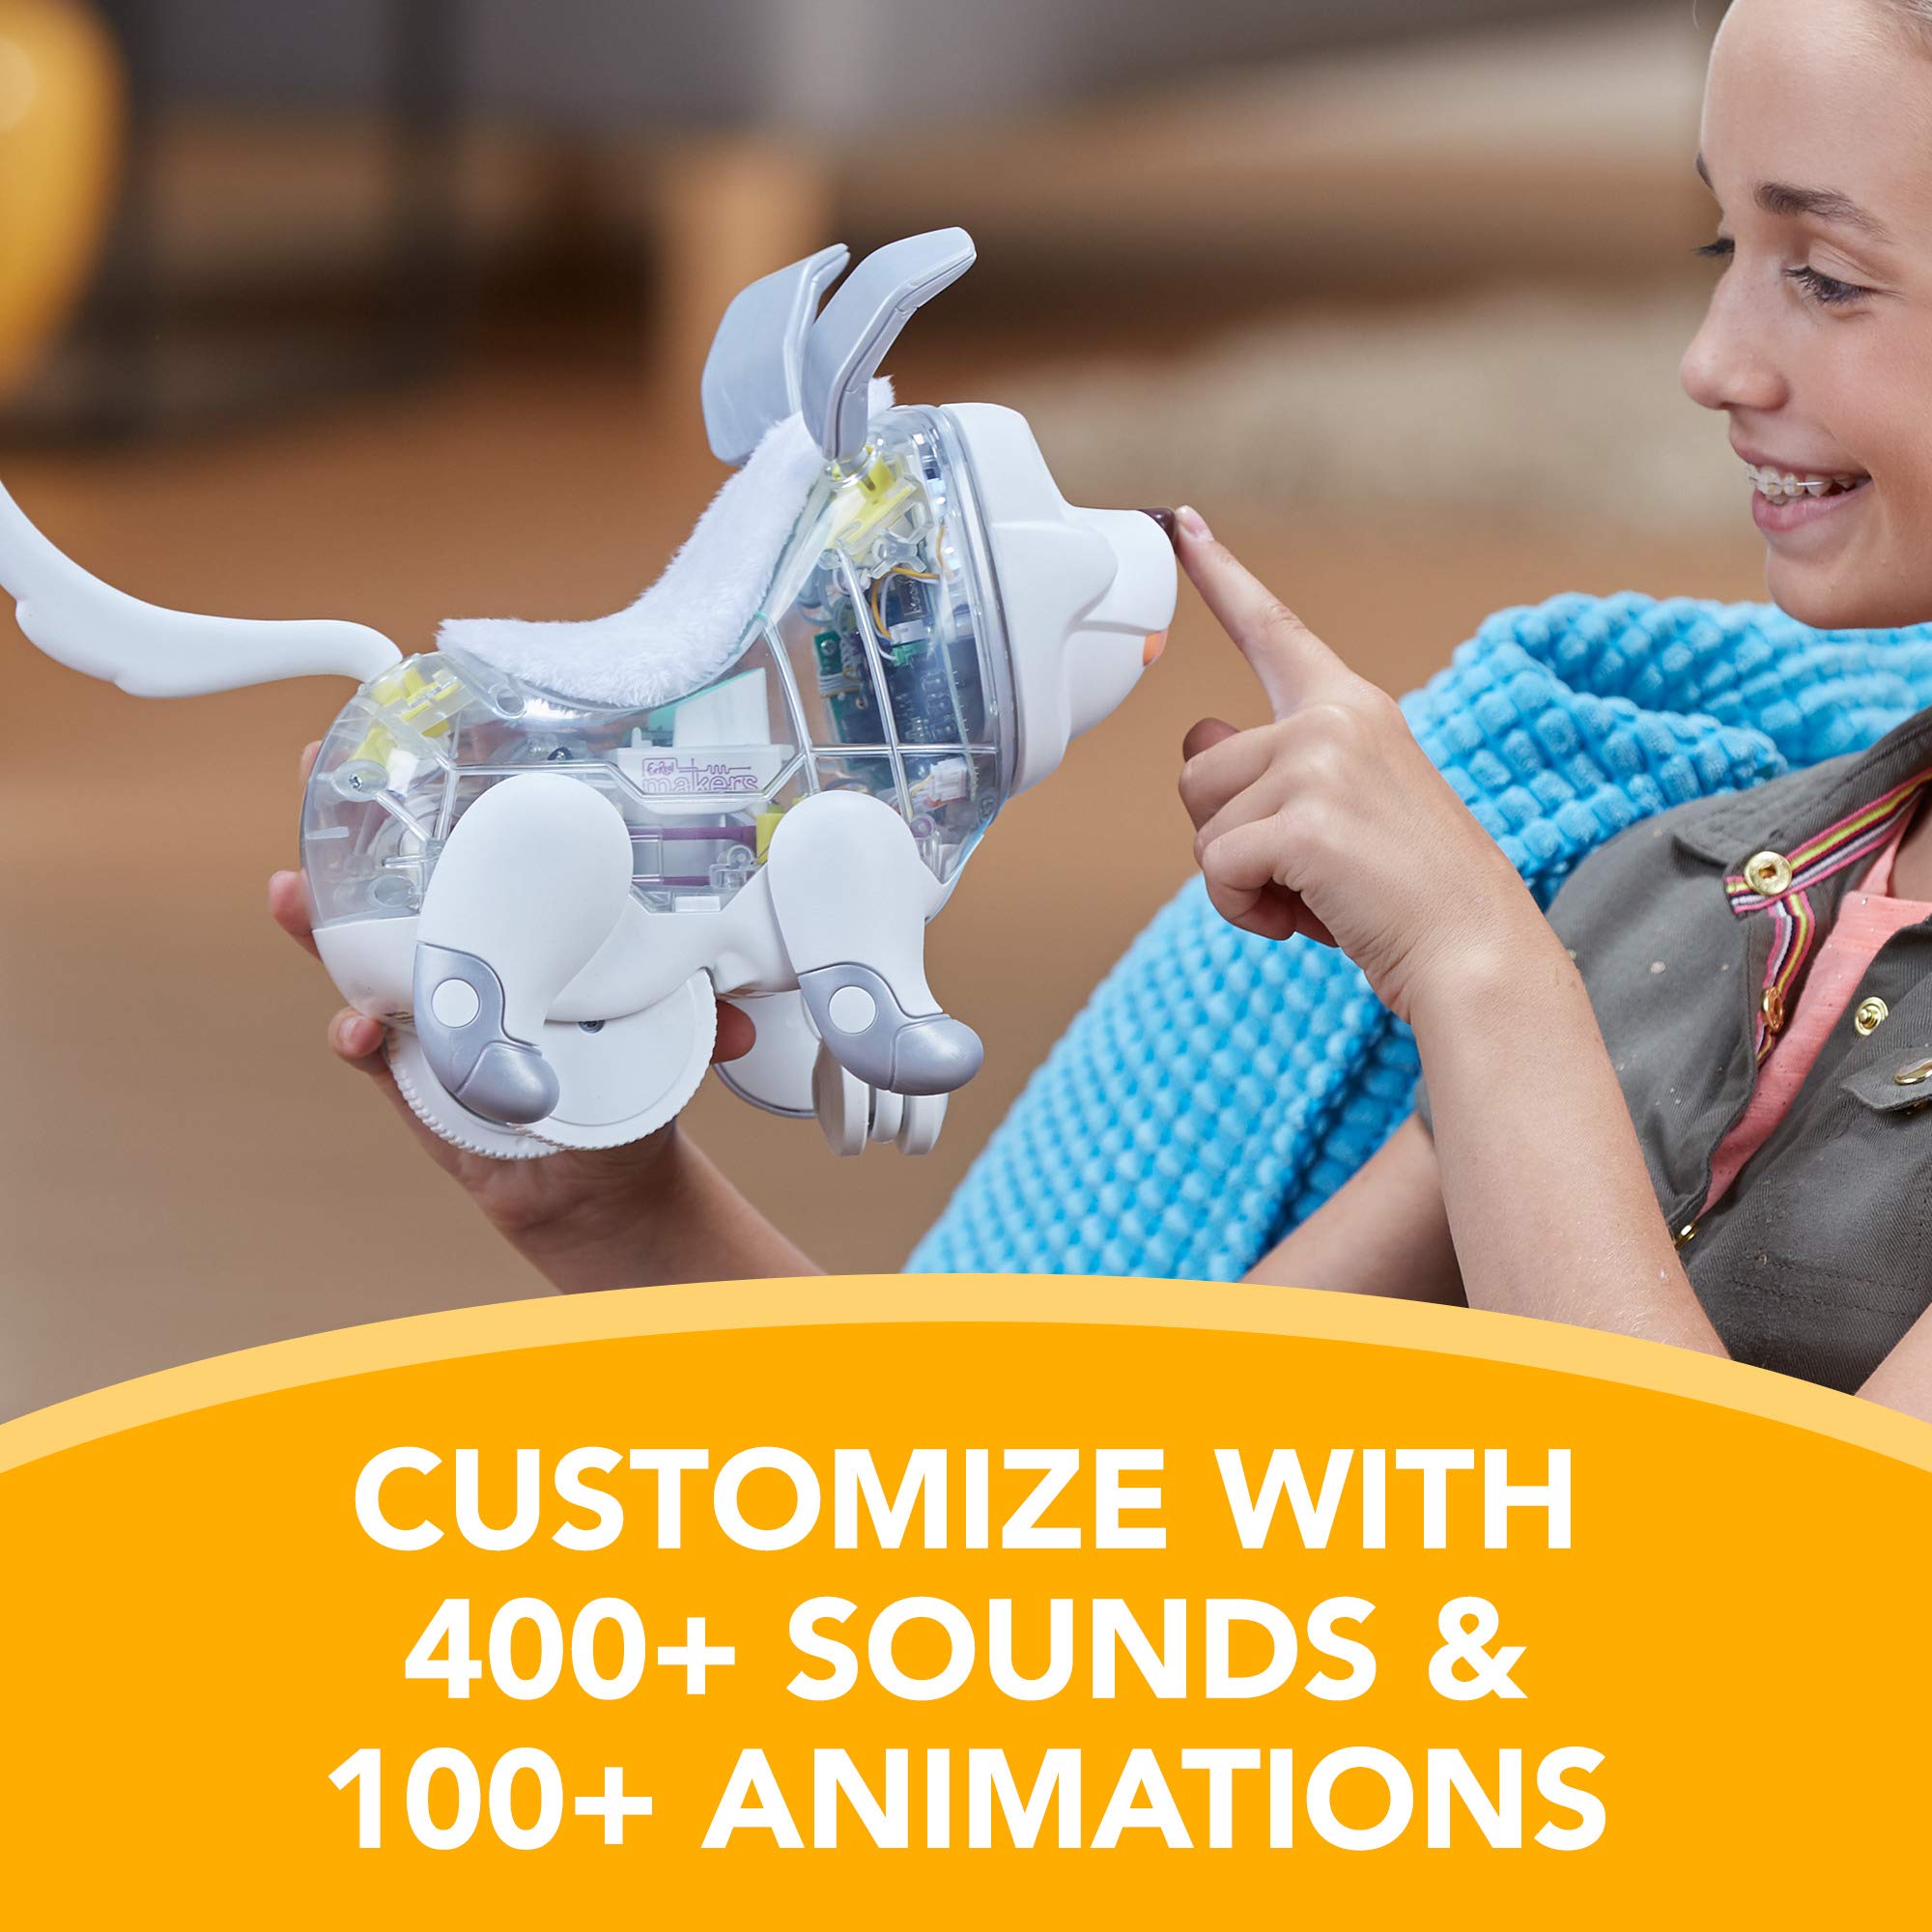 FurReal Makers Proto Max Interactive Pet Toy, Unassembled, Free Downloadable App, Ages 6 & Up